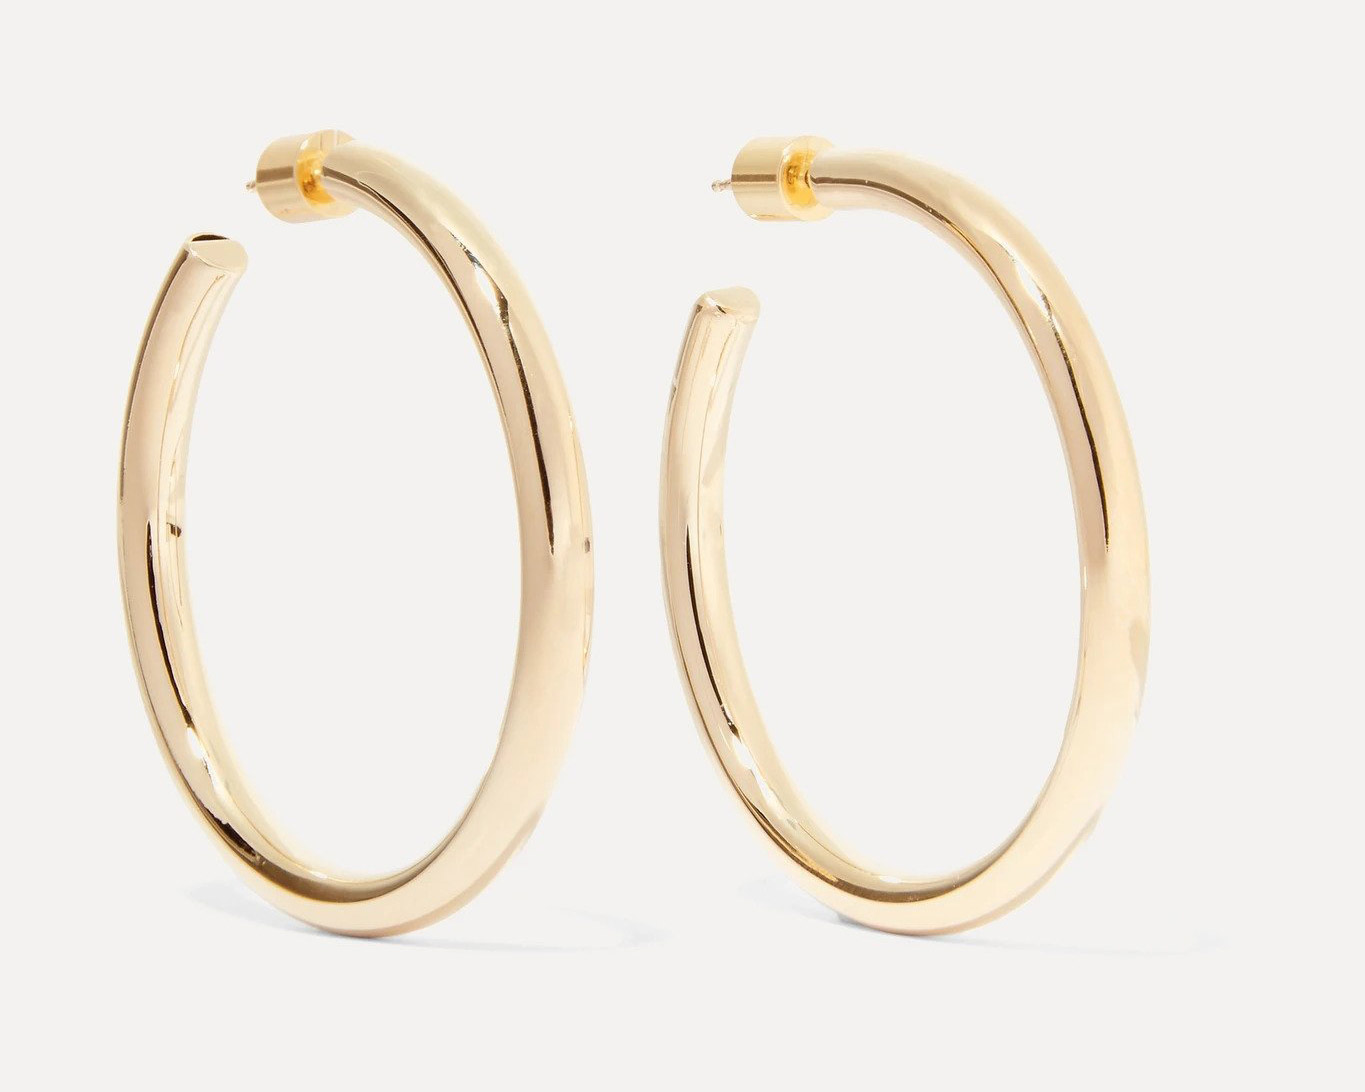 14 Gold Hoop Earrings To Polish Up Your Look | Urban List